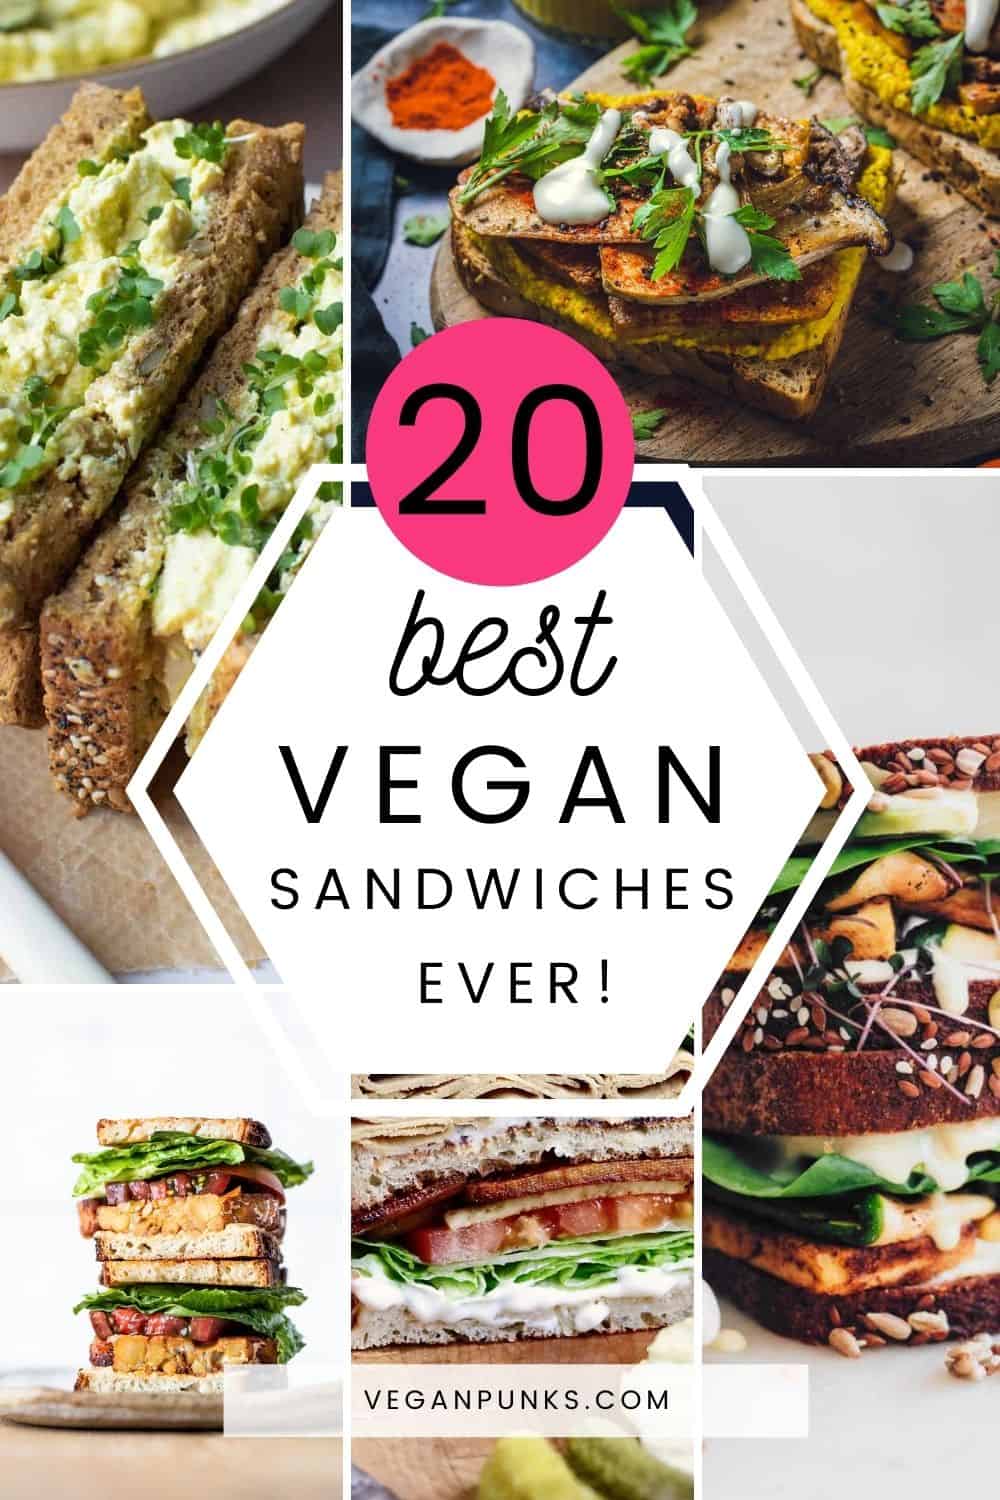 Collage of vegan sandwiches with a Pinterest title in the middle.